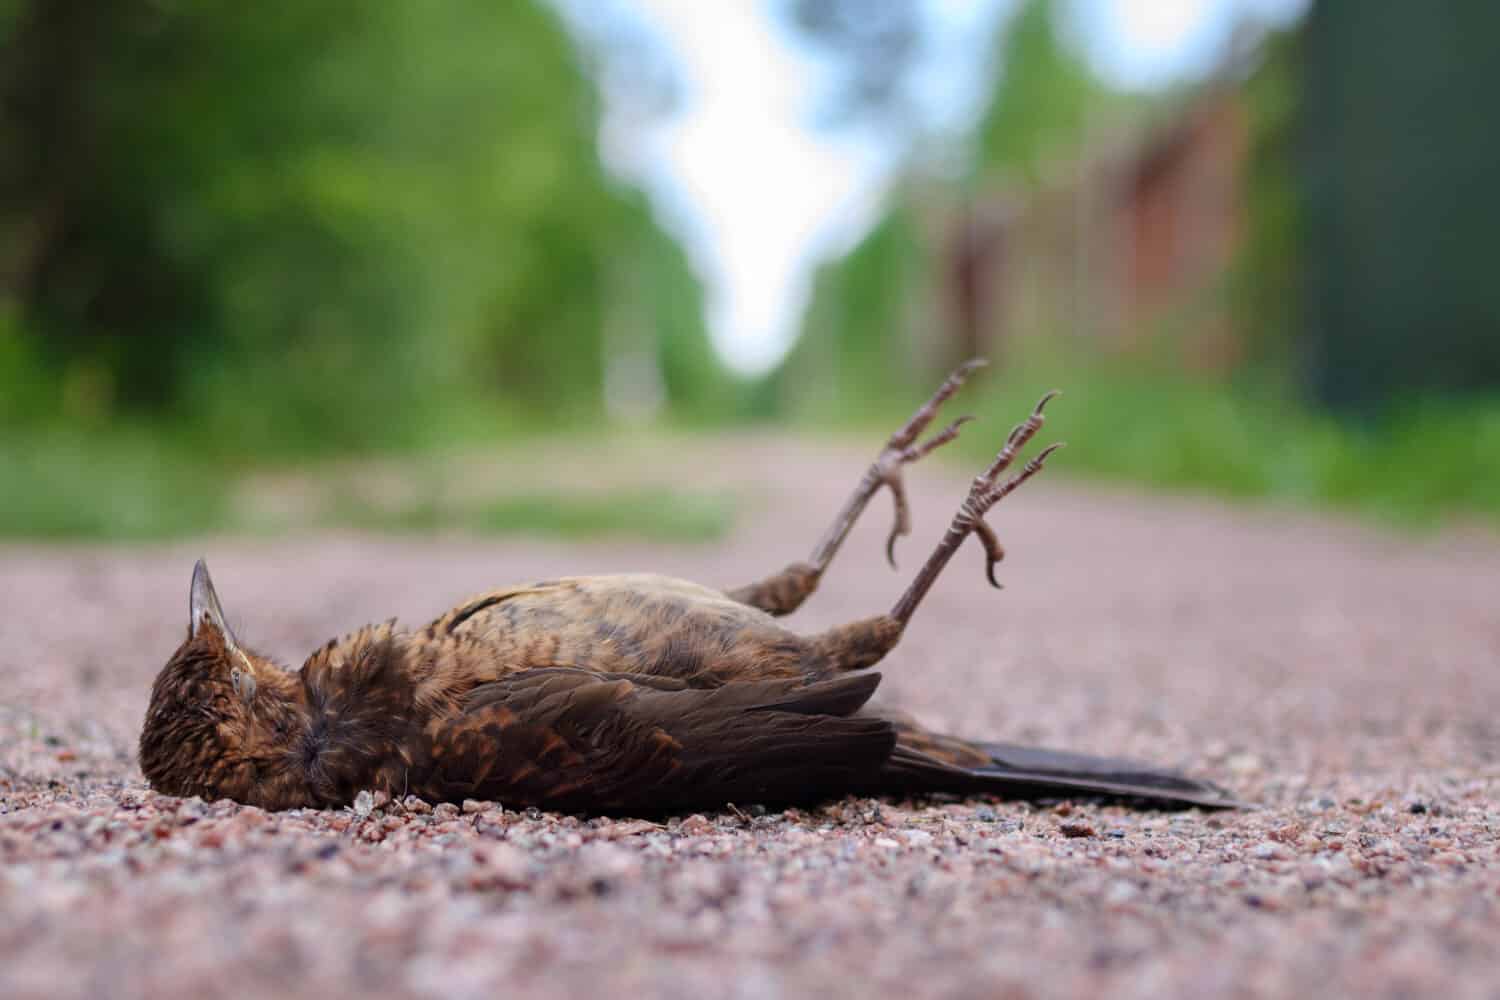 Bird sparrow killed by car on road. Dead bird lies on the asphalt. Wounded sparrow on the pavement. Animal protection and respect for nature.